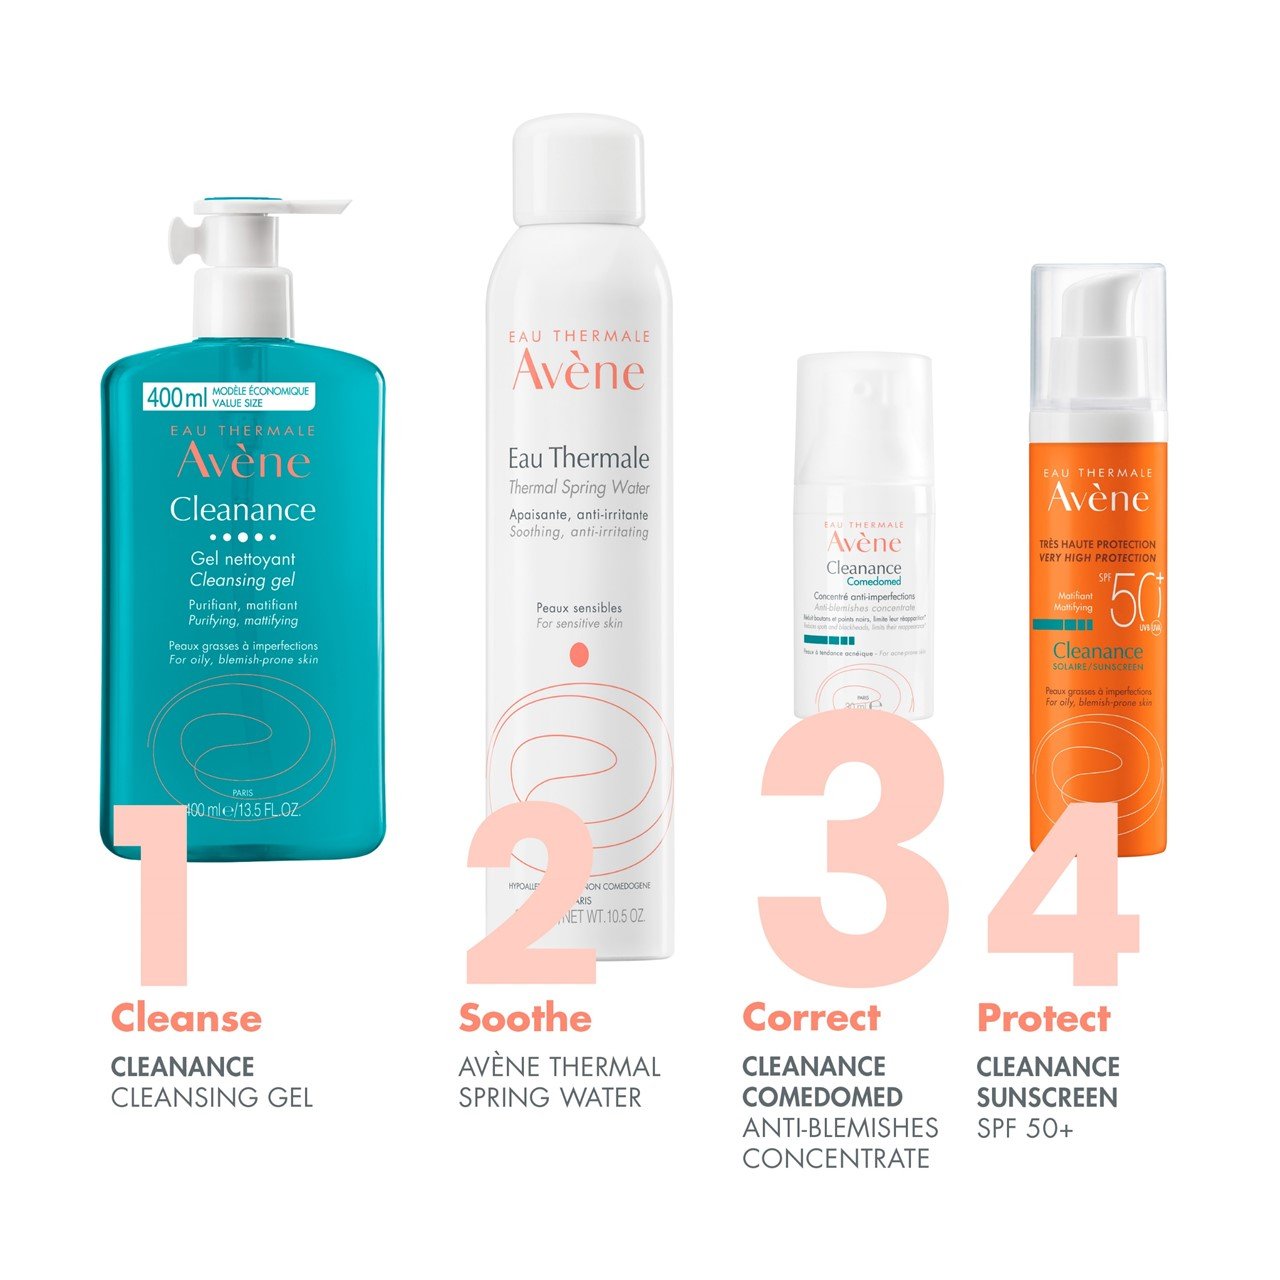 Avène Cleanance Expert Tinted Emulsion Against Imperfections Acne Prone  Skin